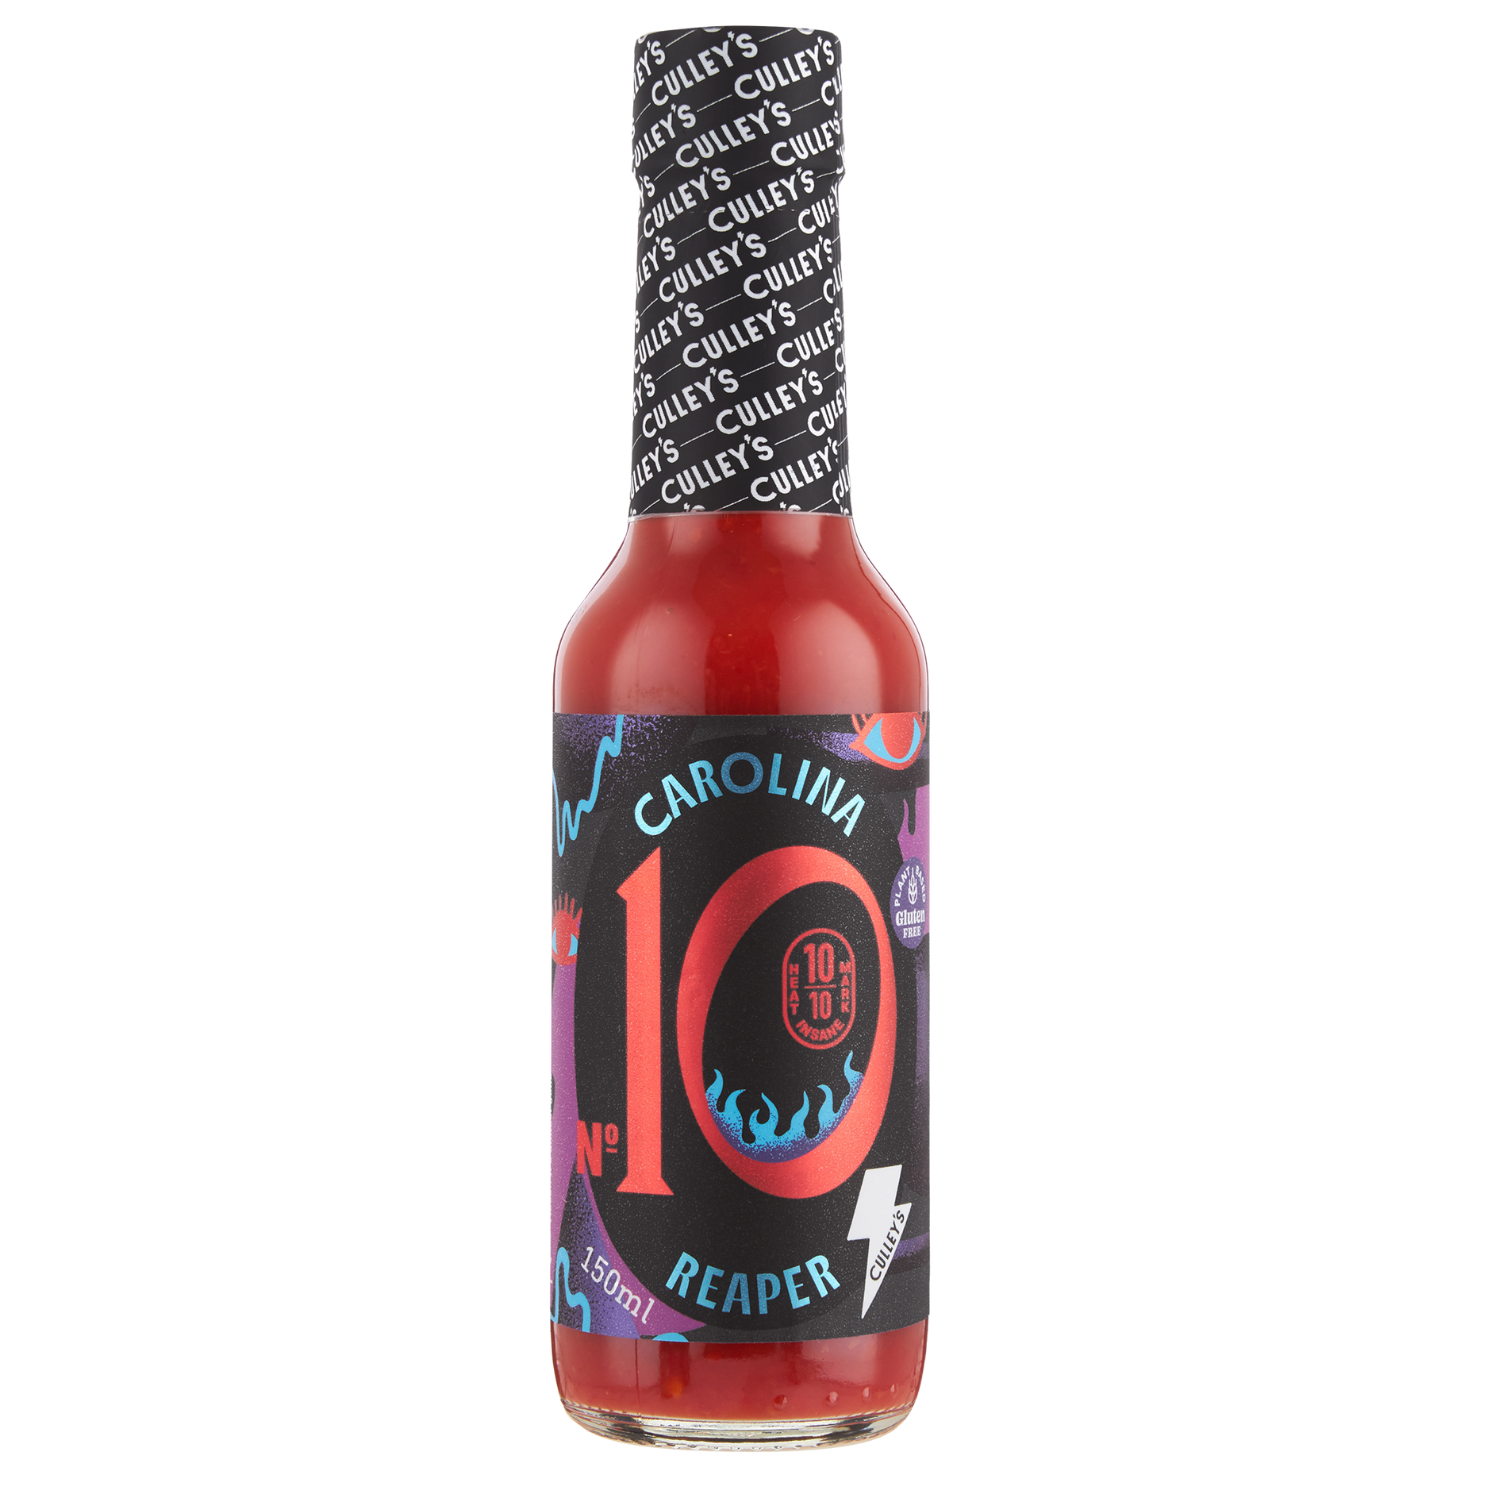 Culley's #10 Reaper Hot Sauce